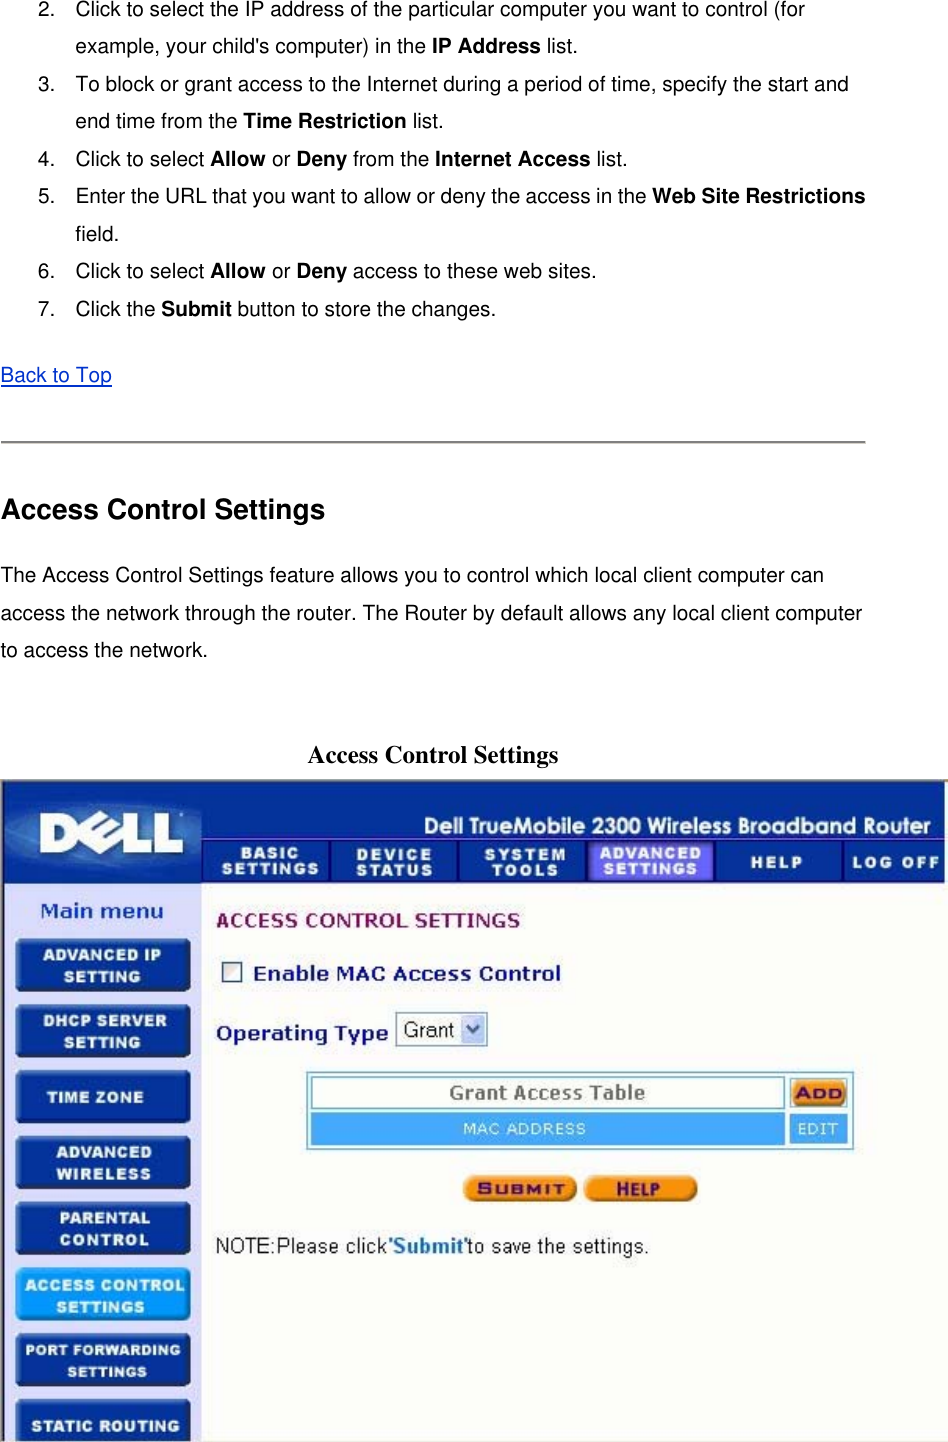 2.  Click to select the IP address of the particular computer you want to control (for example, your child&apos;s computer) in the IP Address list.   3.  To block or grant access to the Internet during a period of time, specify the start and end time from the Time Restriction list.   4.  Click to select Allow or Deny from the Internet Access list.   5.  Enter the URL that you want to allow or deny the access in the Web Site Restrictions field.  6.  Click to select Allow or Deny access to these web sites.   7. Click the Submit button to store the changes.   Back to Top  Access Control Settings The Access Control Settings feature allows you to control which local client computer can access the network through the router. The Router by default allows any local client computer to access the network.  Access Control Settings  